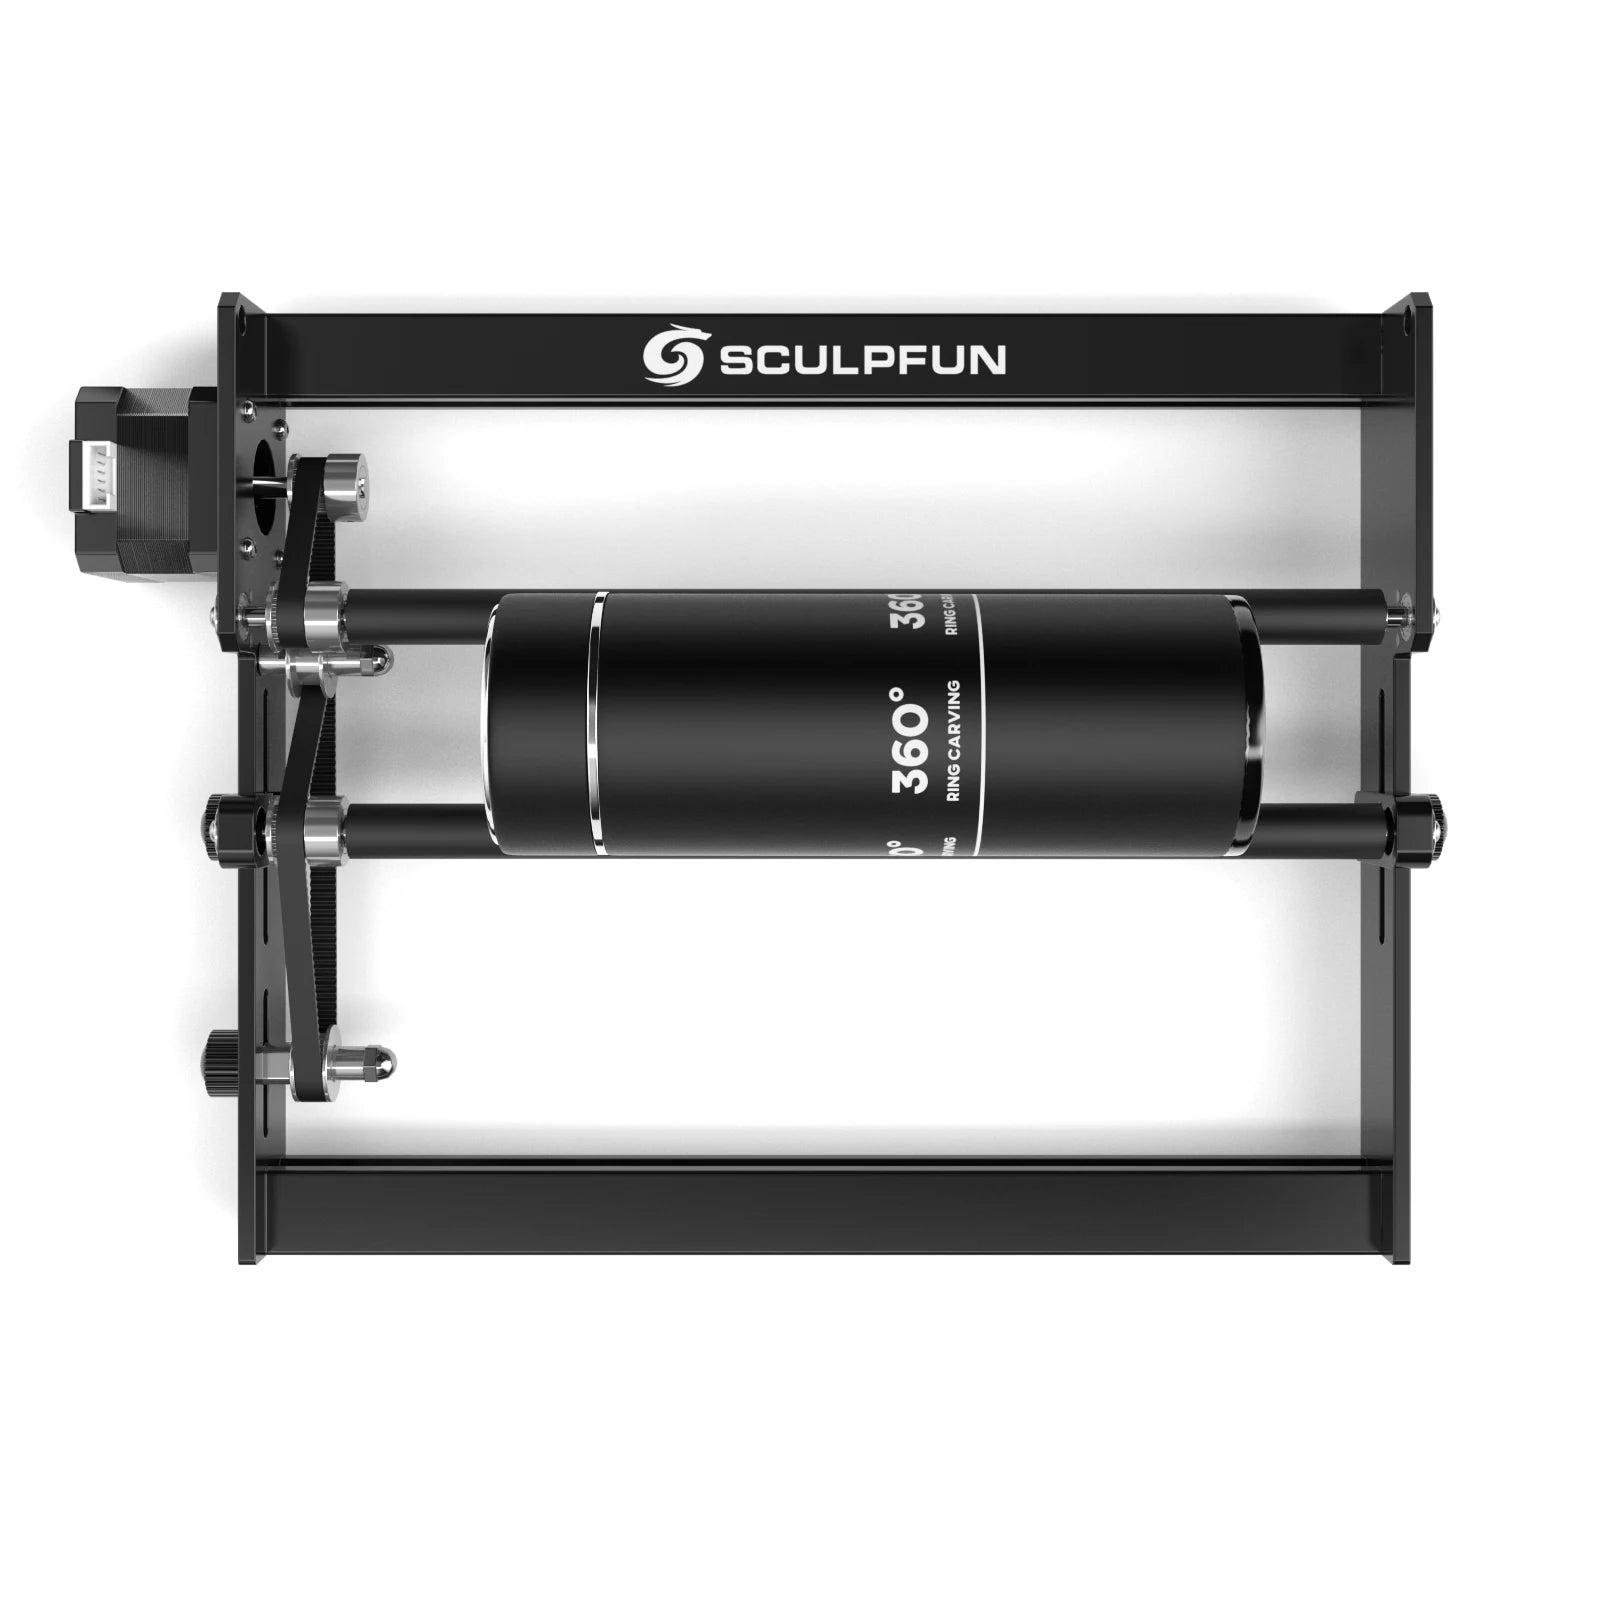 SCULPFUN S9 90W Laser Engraving machine and Roller Y-axis Rotary Roller 360° Rotating for 6-150mm Engraving Cylindrical Objects